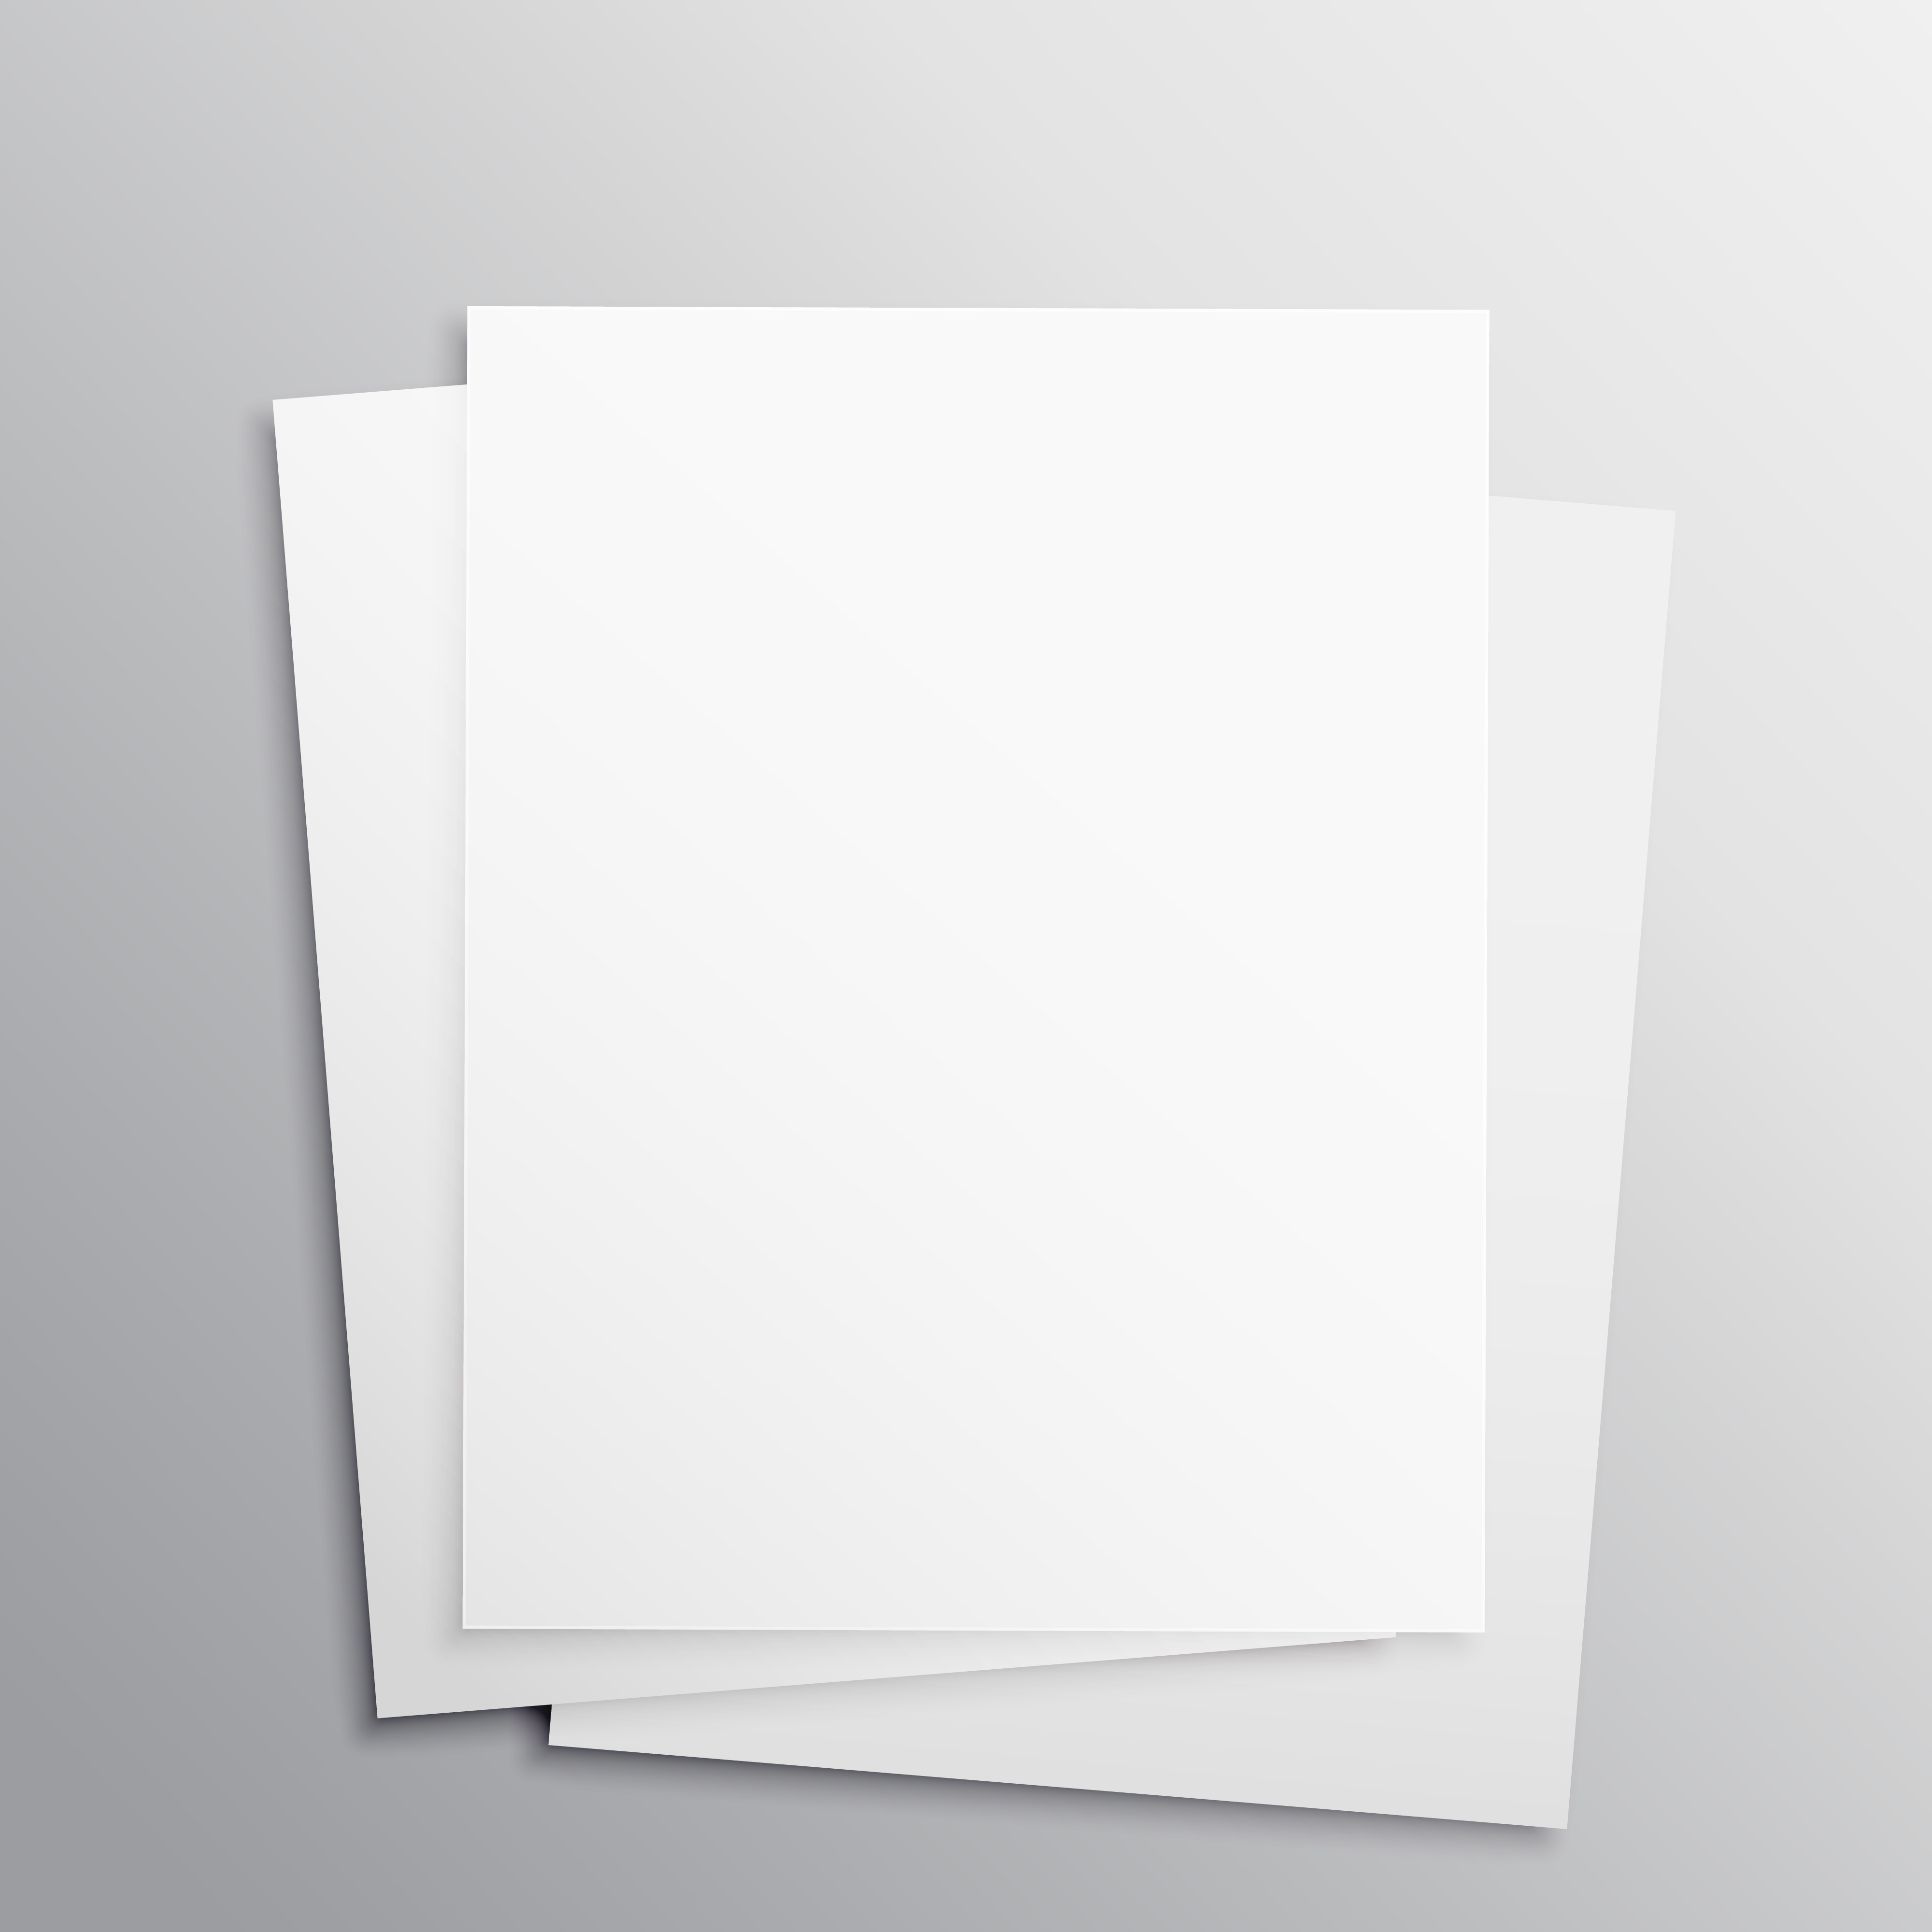 Download stack of three empty papers mockup template - Download Free Vector Art, Stock Graphics & Images